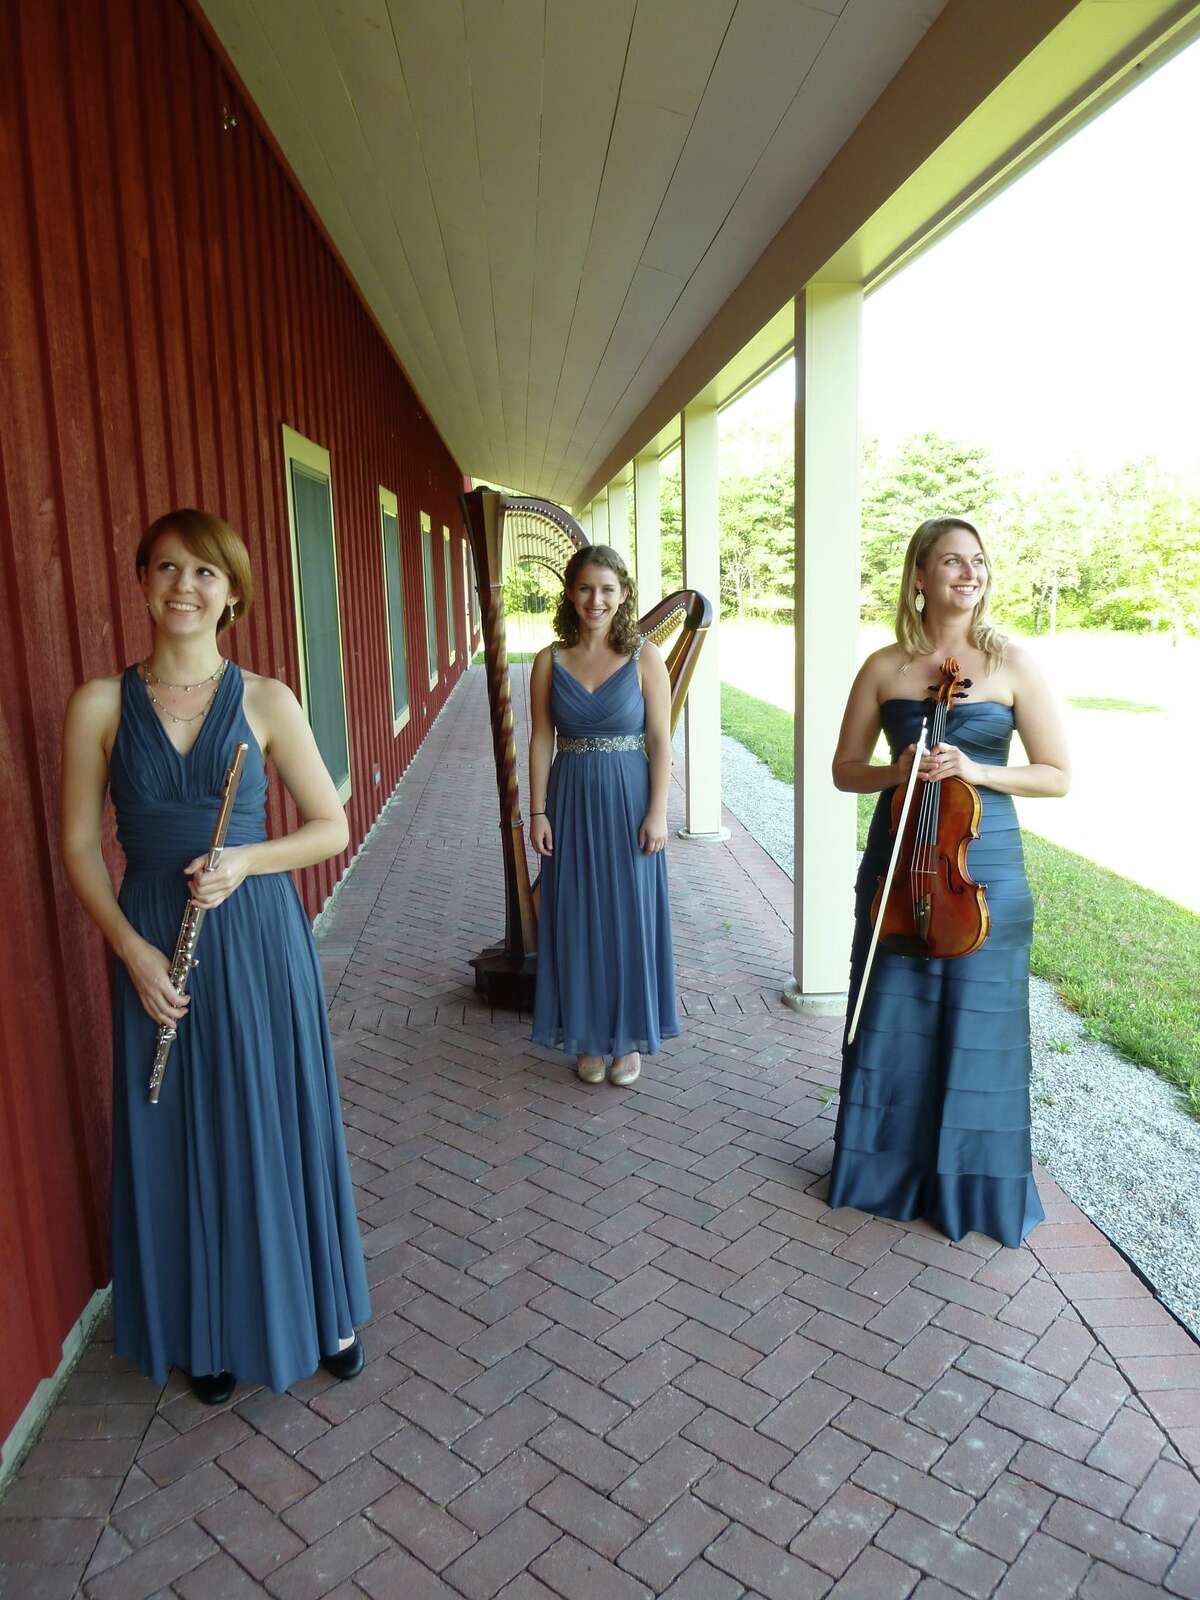 The Deciduous Trio of flutist Amulet Strange, from left, harpist Hope Cowan and violist Stephanie Meintka will open the 2015-16 season of the Phil Kramer Recital Series at New Hope Lutheran Church.